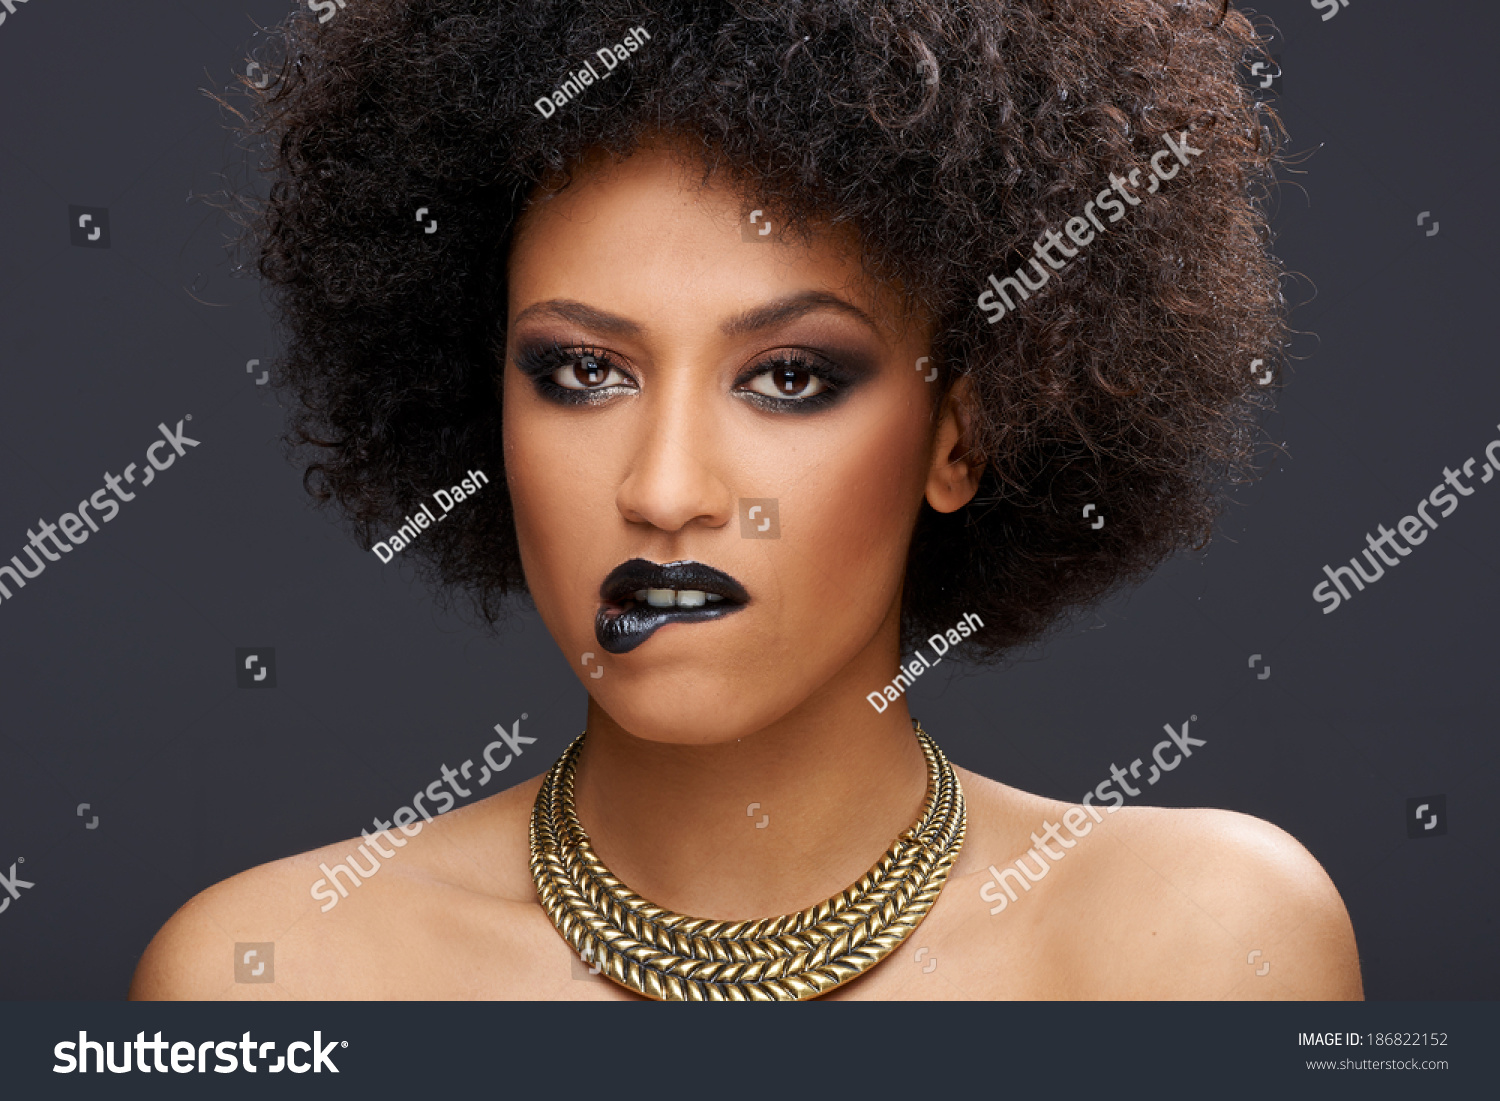 Sensual Elegant African American Woman With Bare Shoulders Wearing A Stylish Gold Choker And